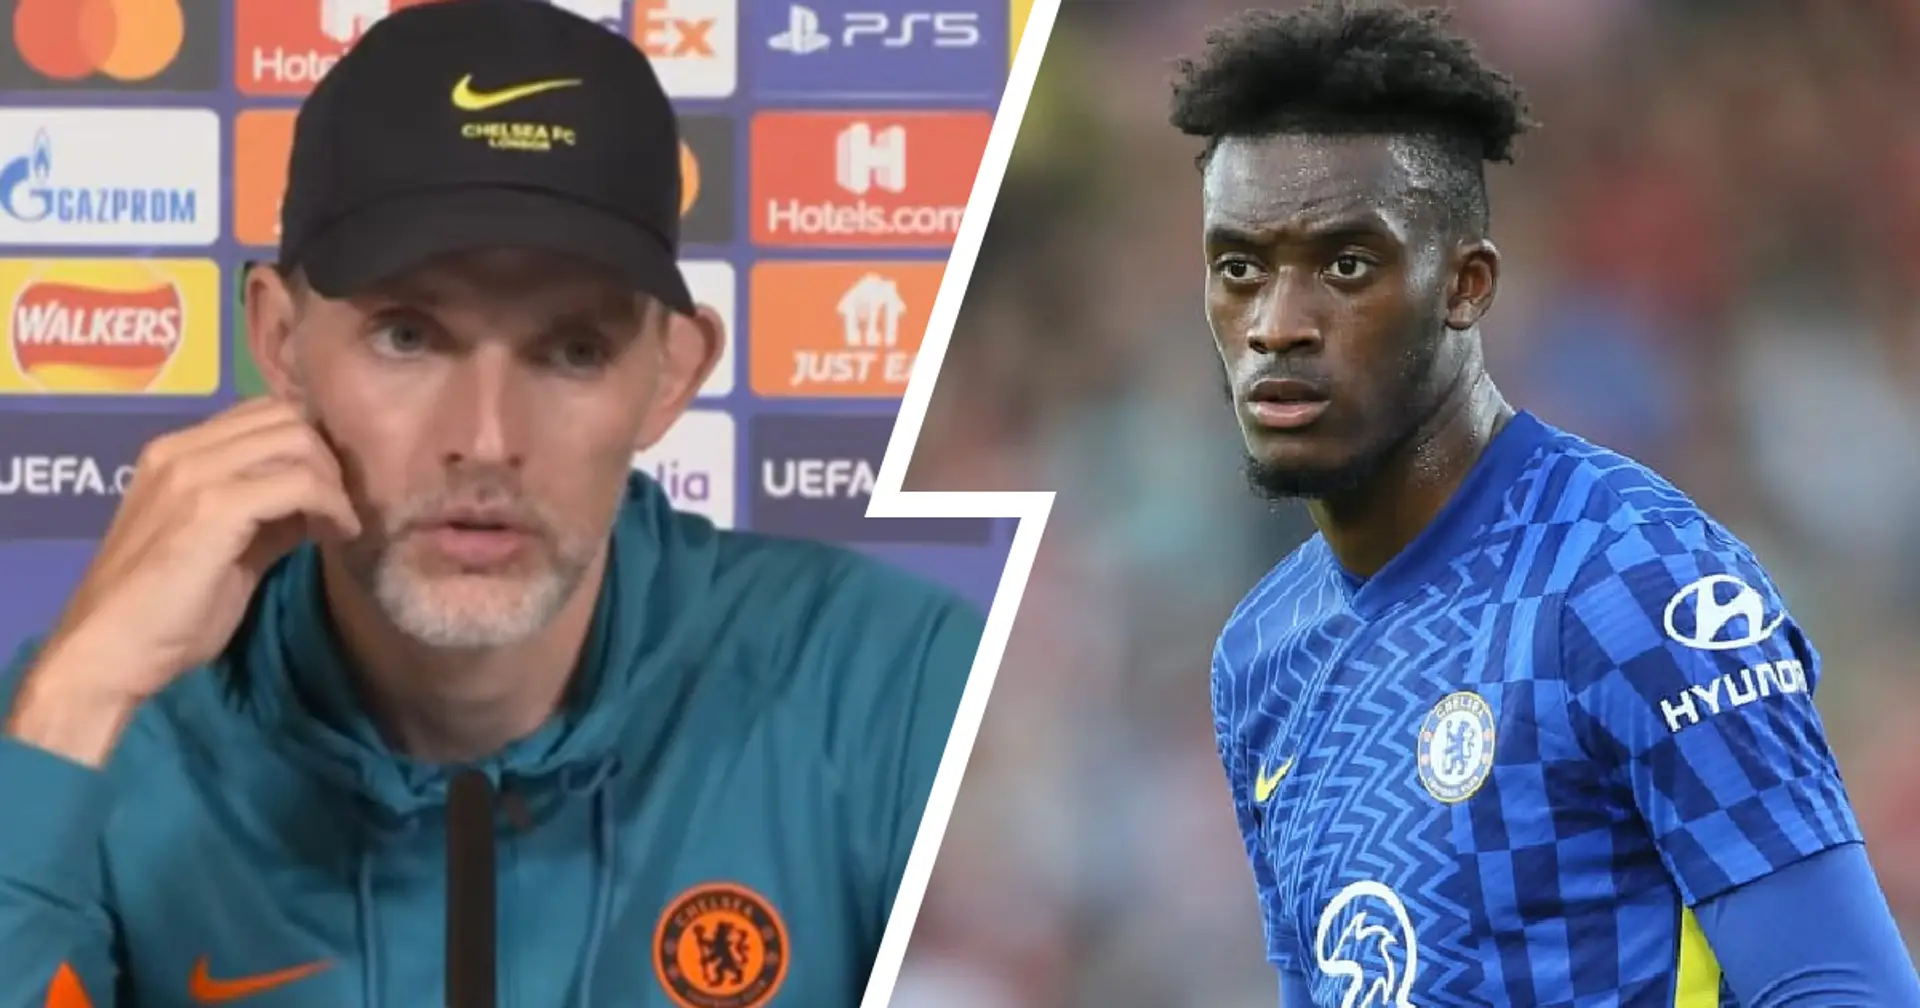 Tuchel rules out Hudson-Odoi for 'weeks', gives injury update on 2 other players before Southampton game